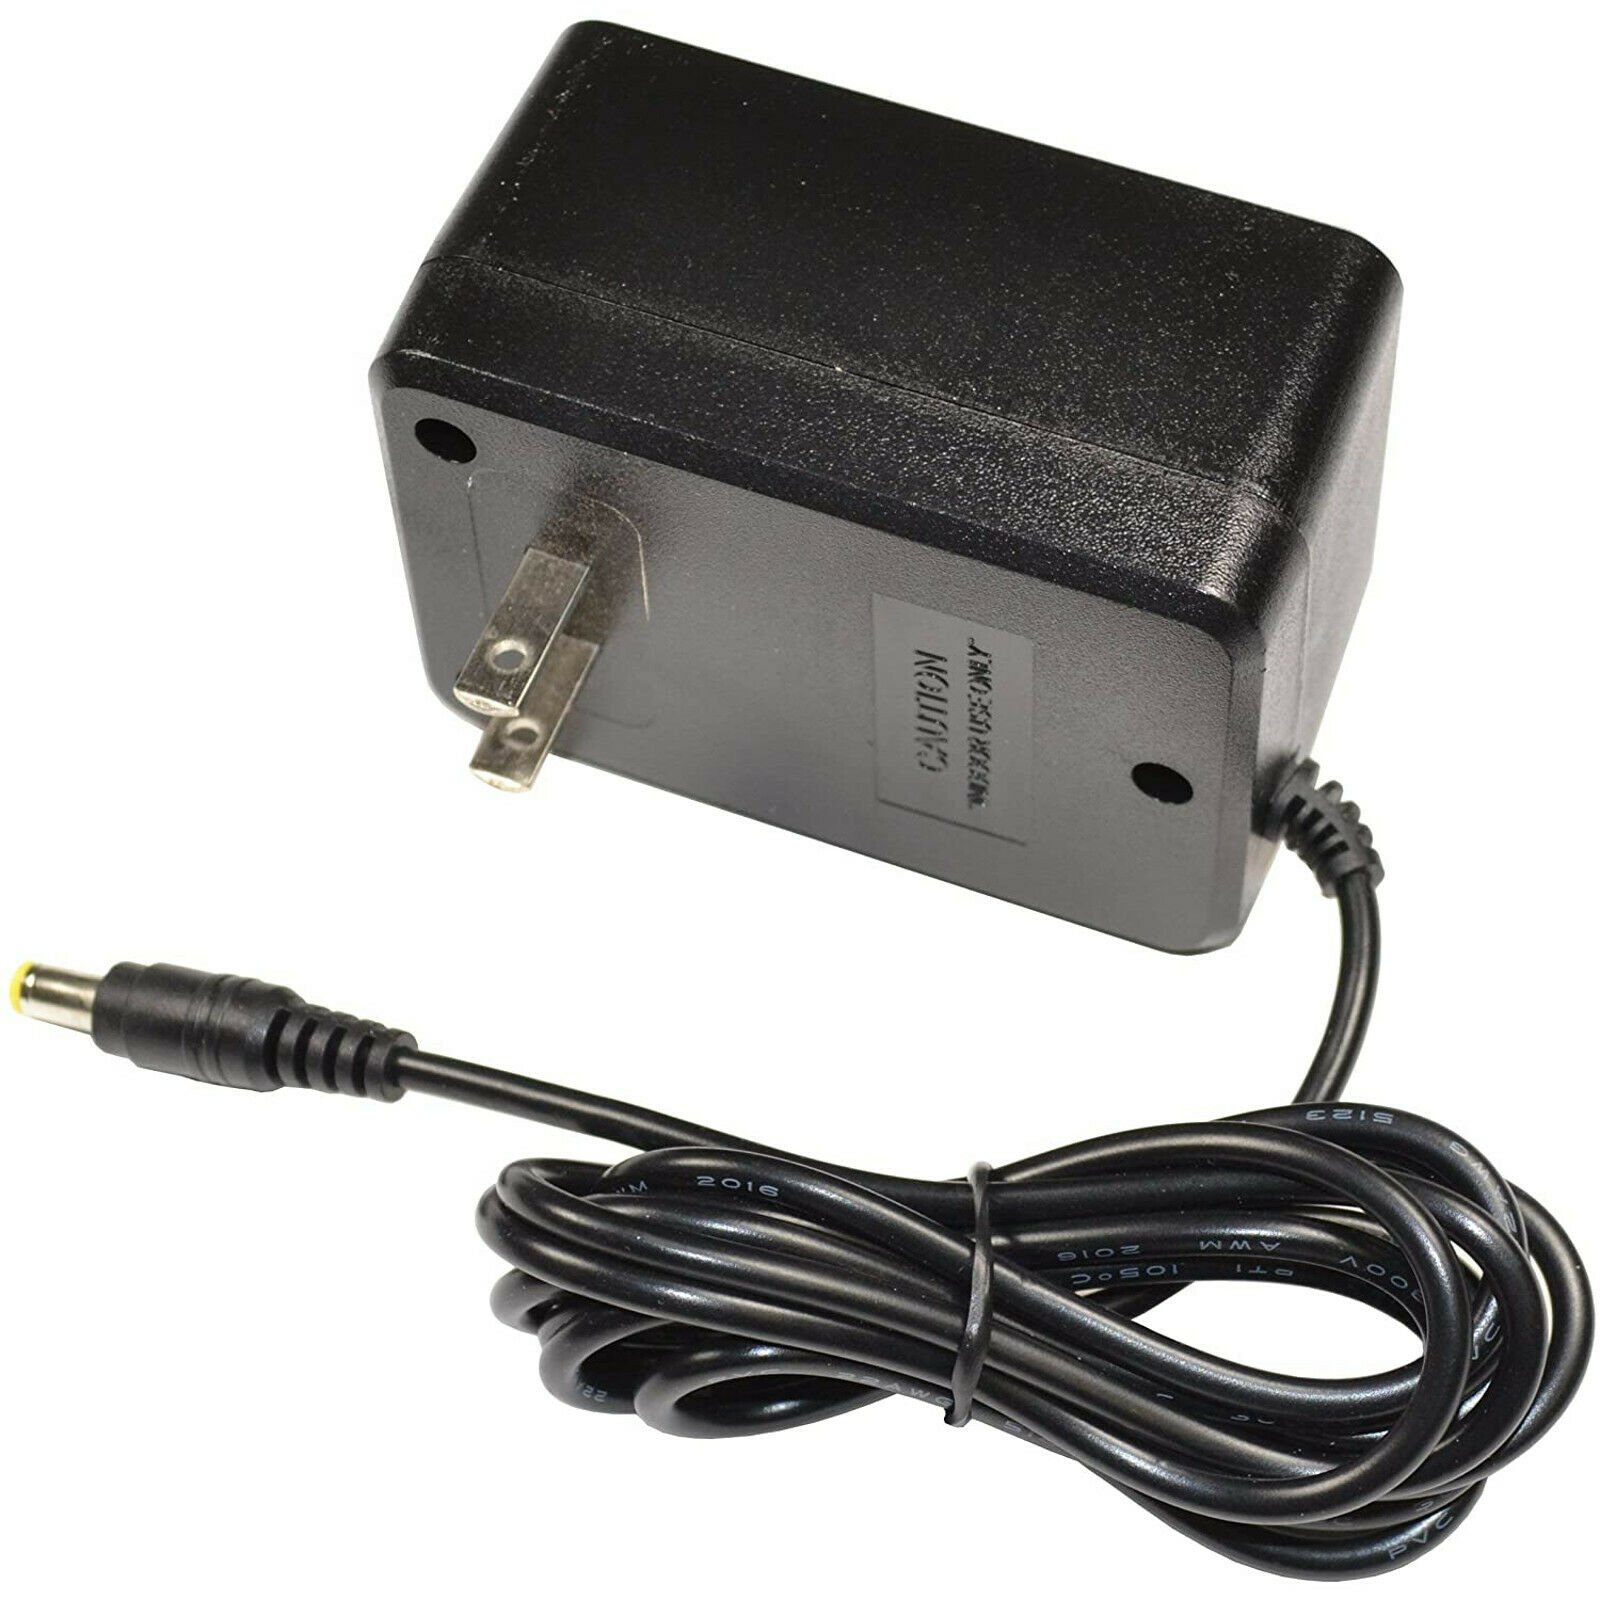 12V AC Adapter for COLEMAN 5342 5348 Lanterns Power Supply Battery Charger 12V AC Power Adapter / Battery Charger compa - Click Image to Close